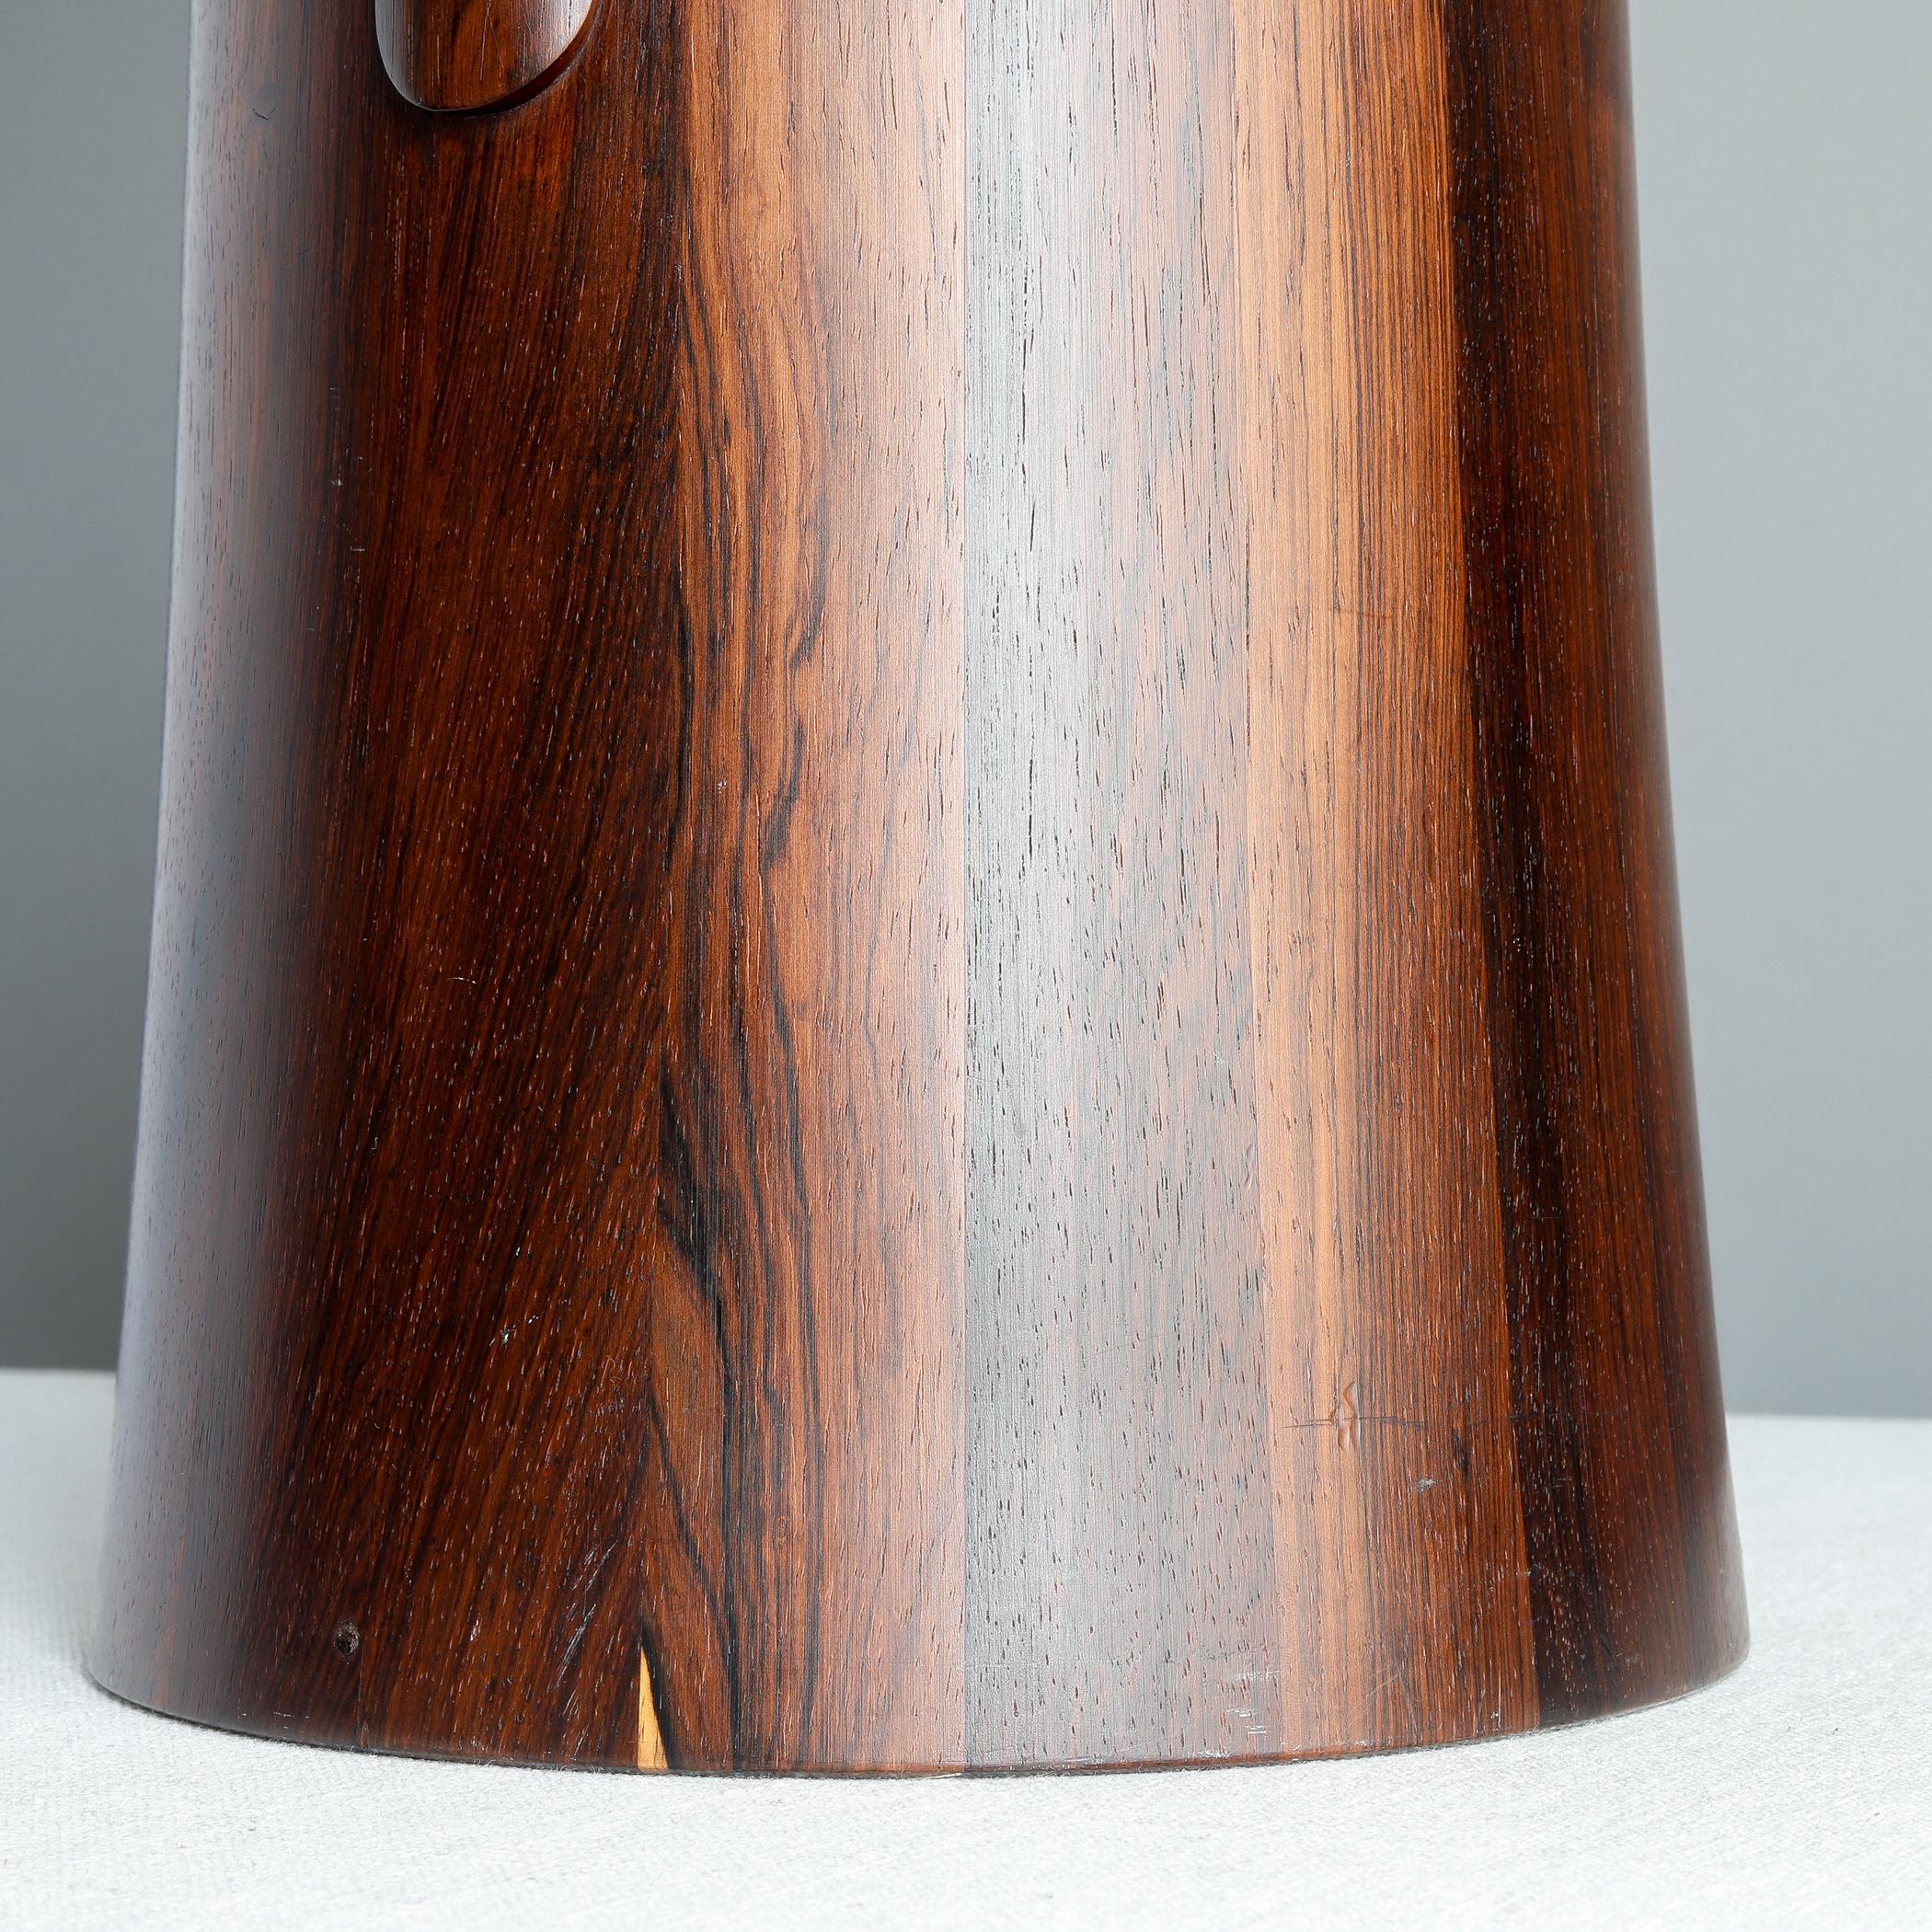 Mid-20th Century Dansk Palisander Ice Bucket by Jens Quistgaard, Rare Woods Line, 1960s For Sale